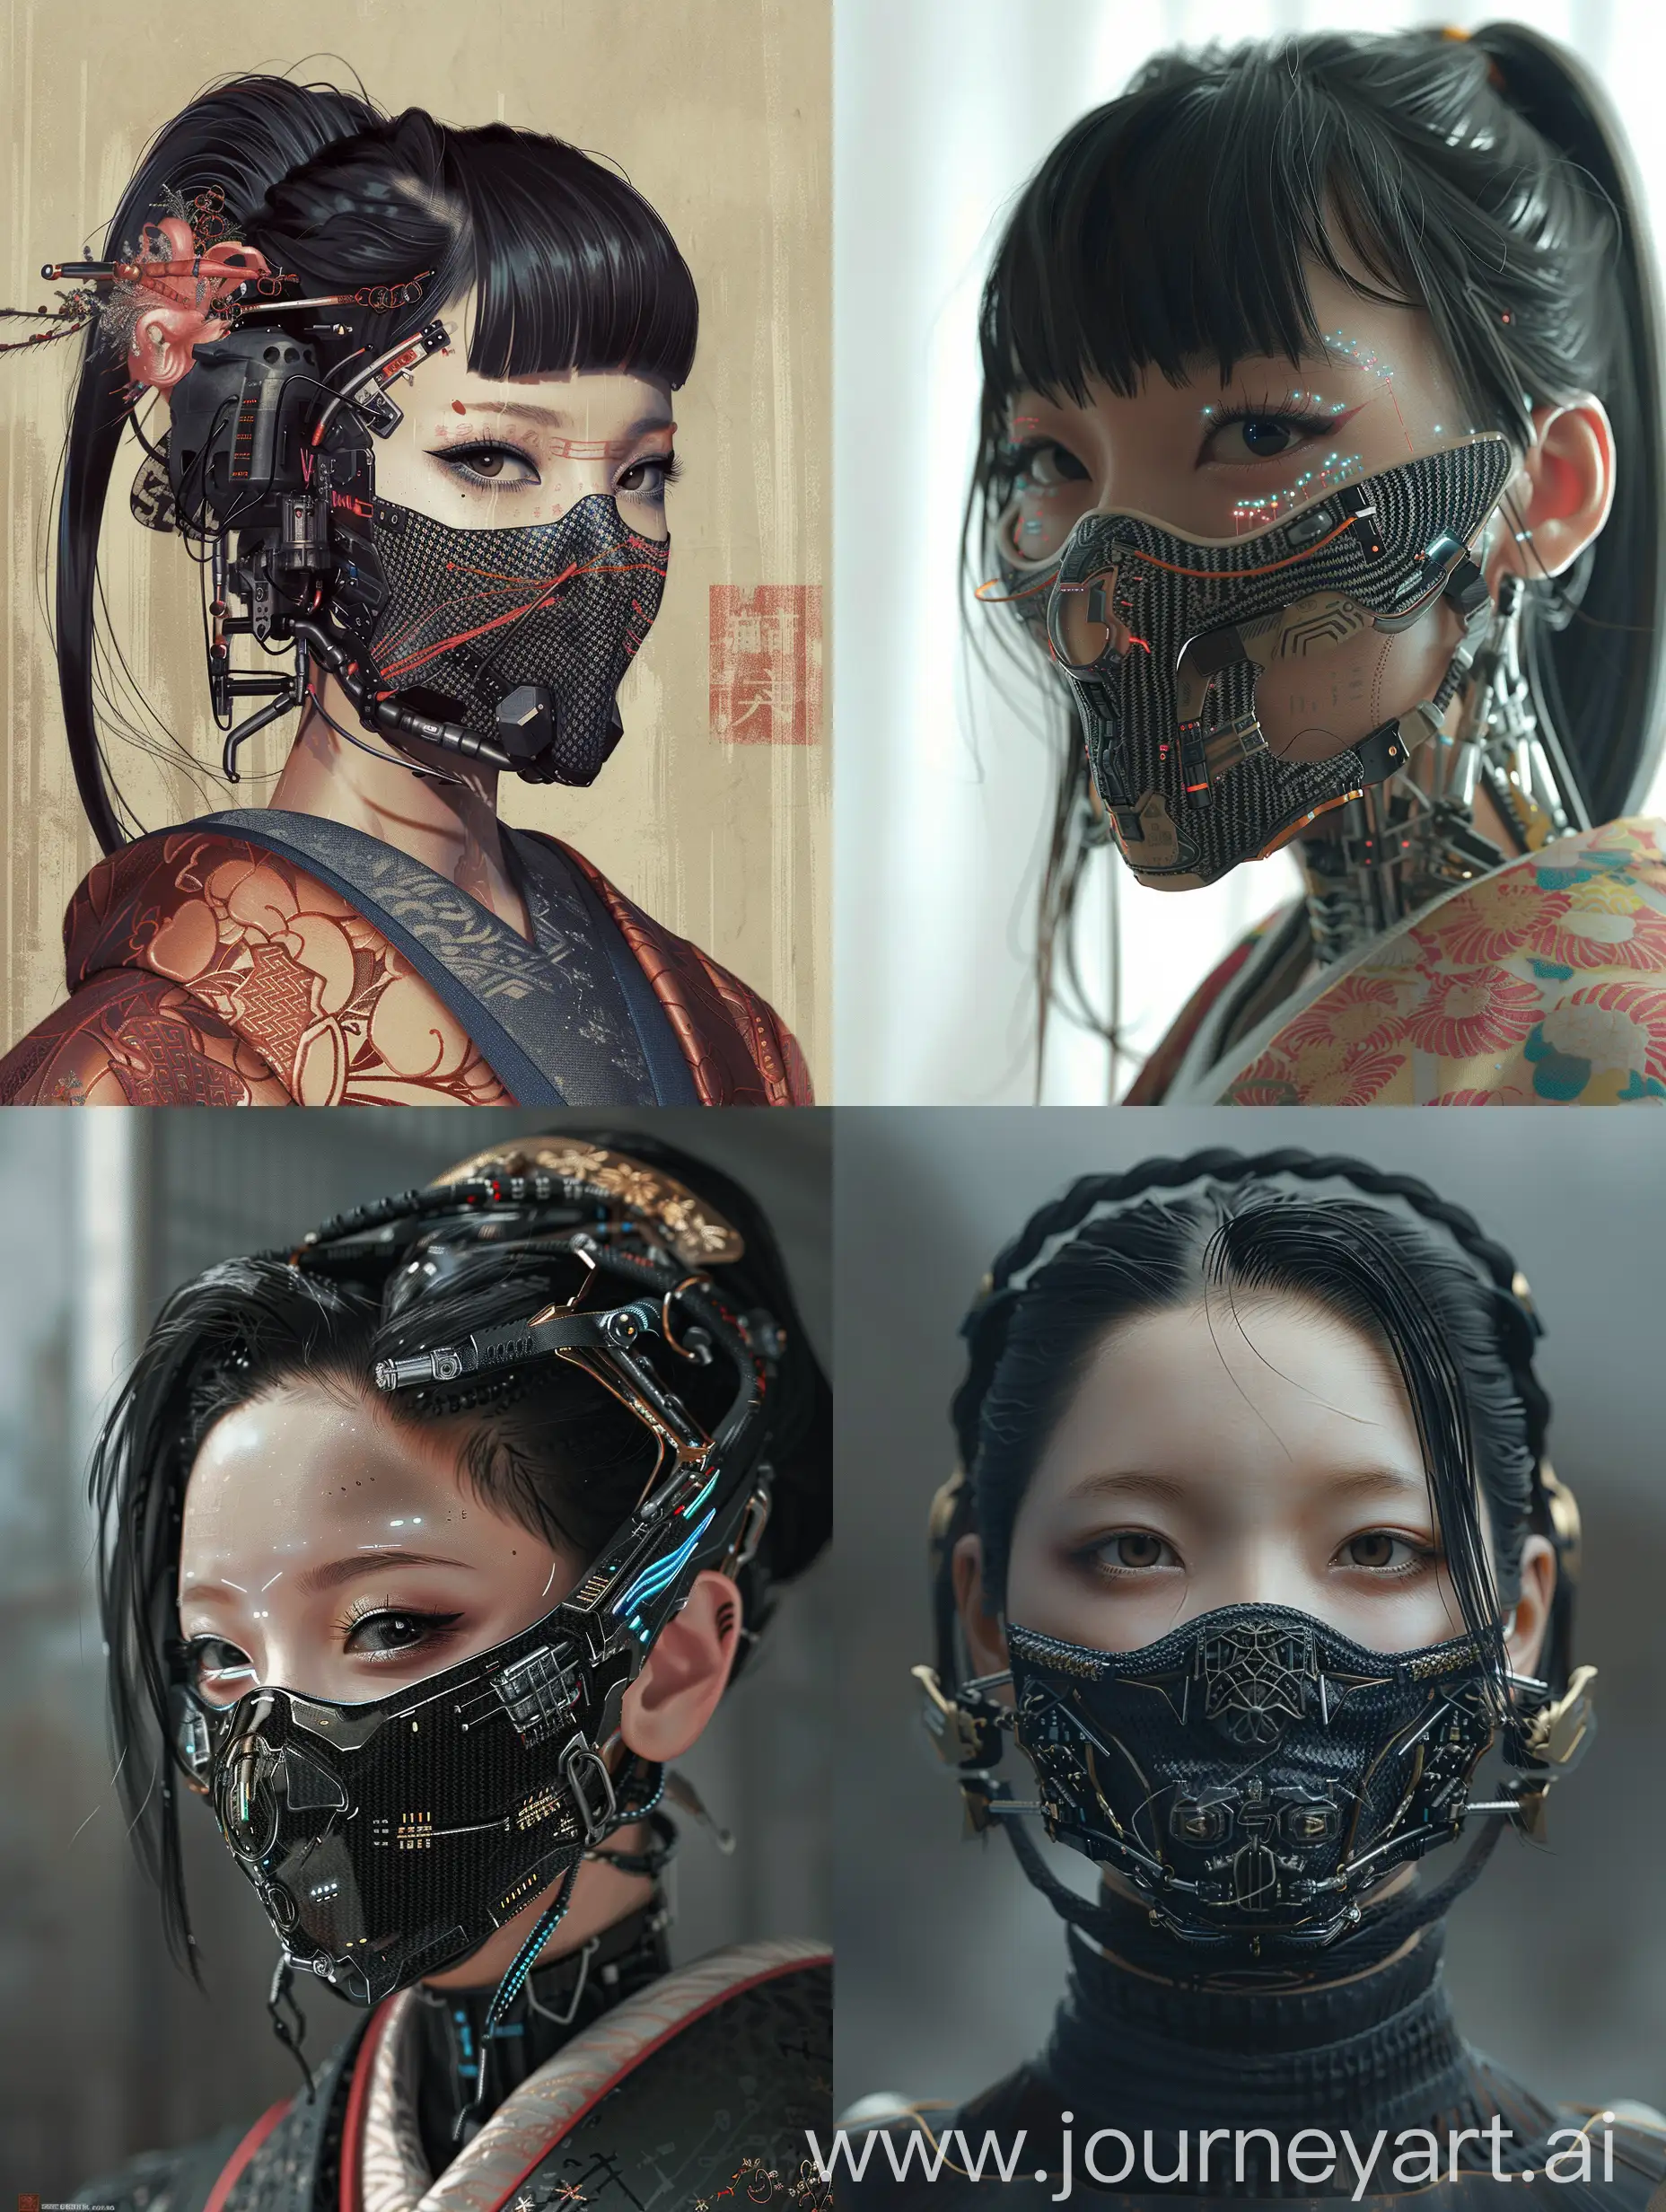 Futuristic-Cyberpunk-Hannya-A-Blend-of-Japanese-Tradition-and-Technology